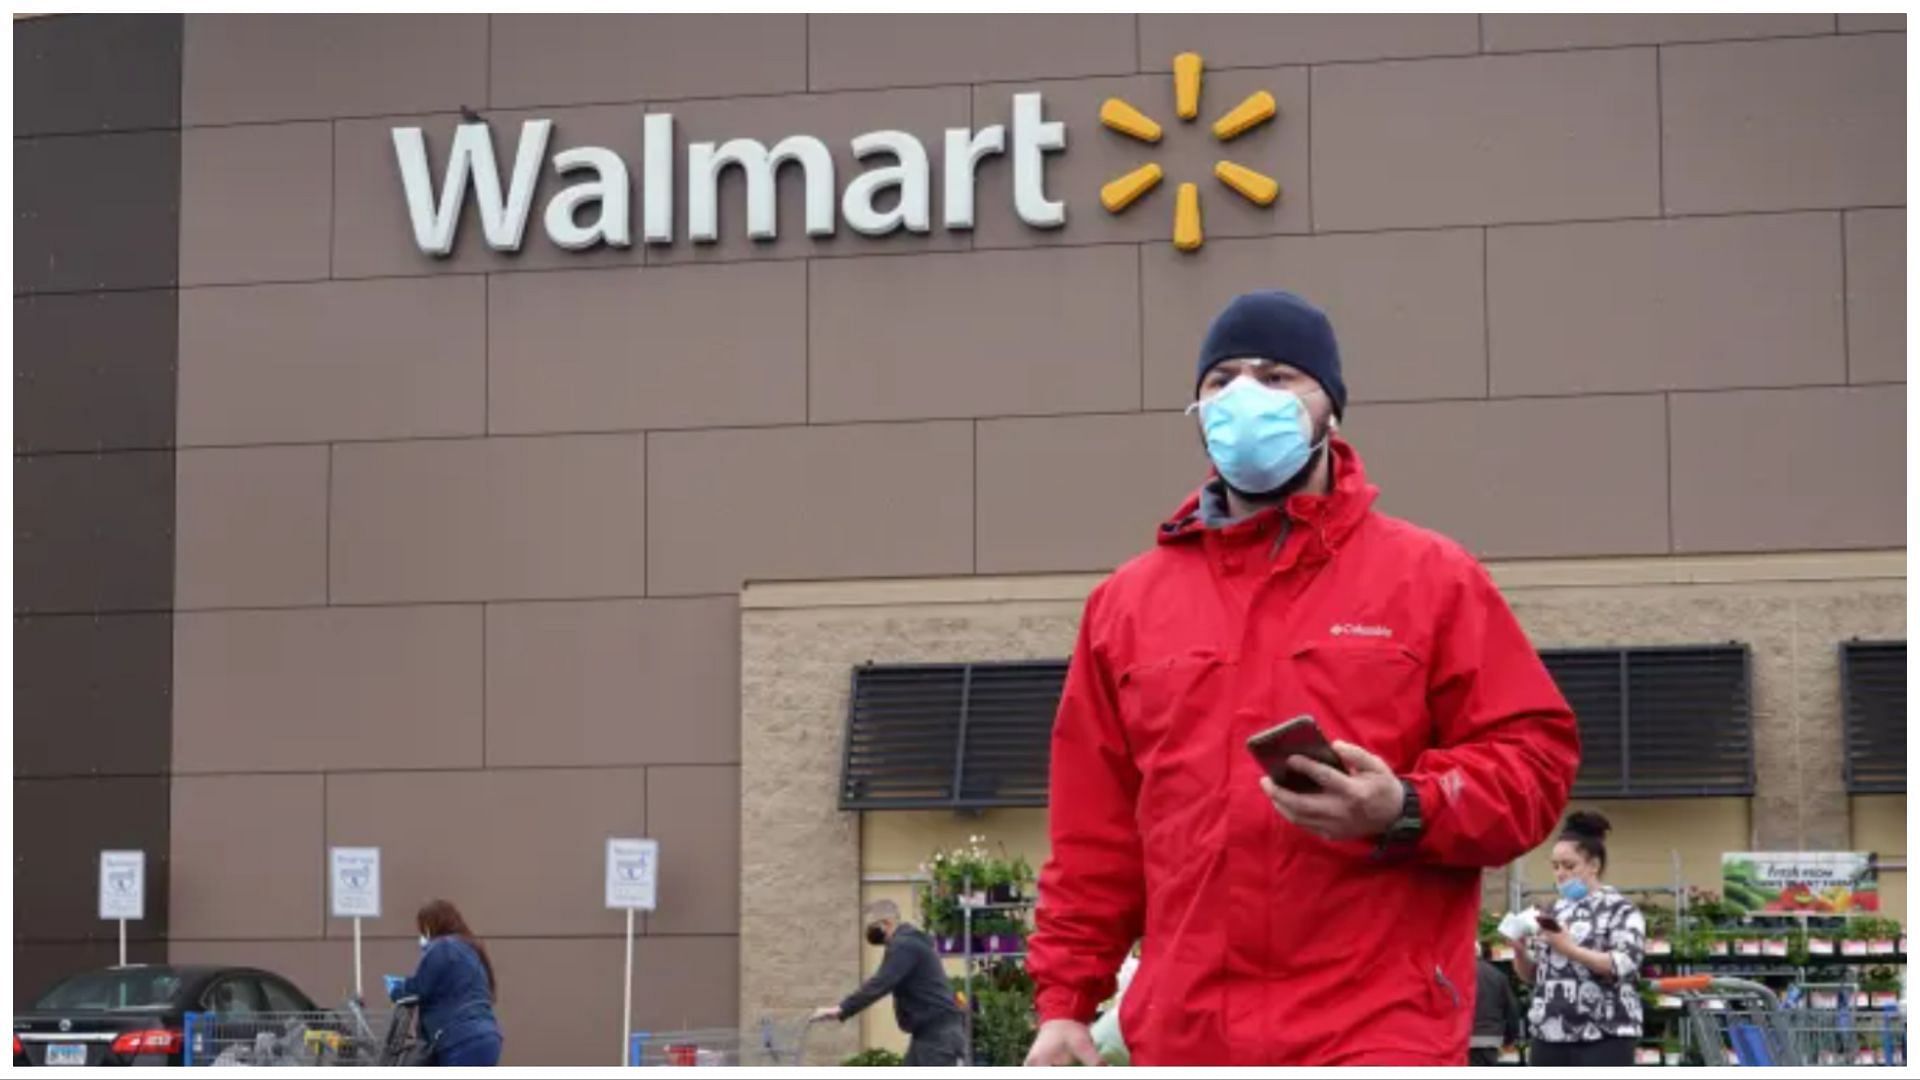 Walmart closes 4 stores in Chicago sparking outrage online (Image via Getty Images)